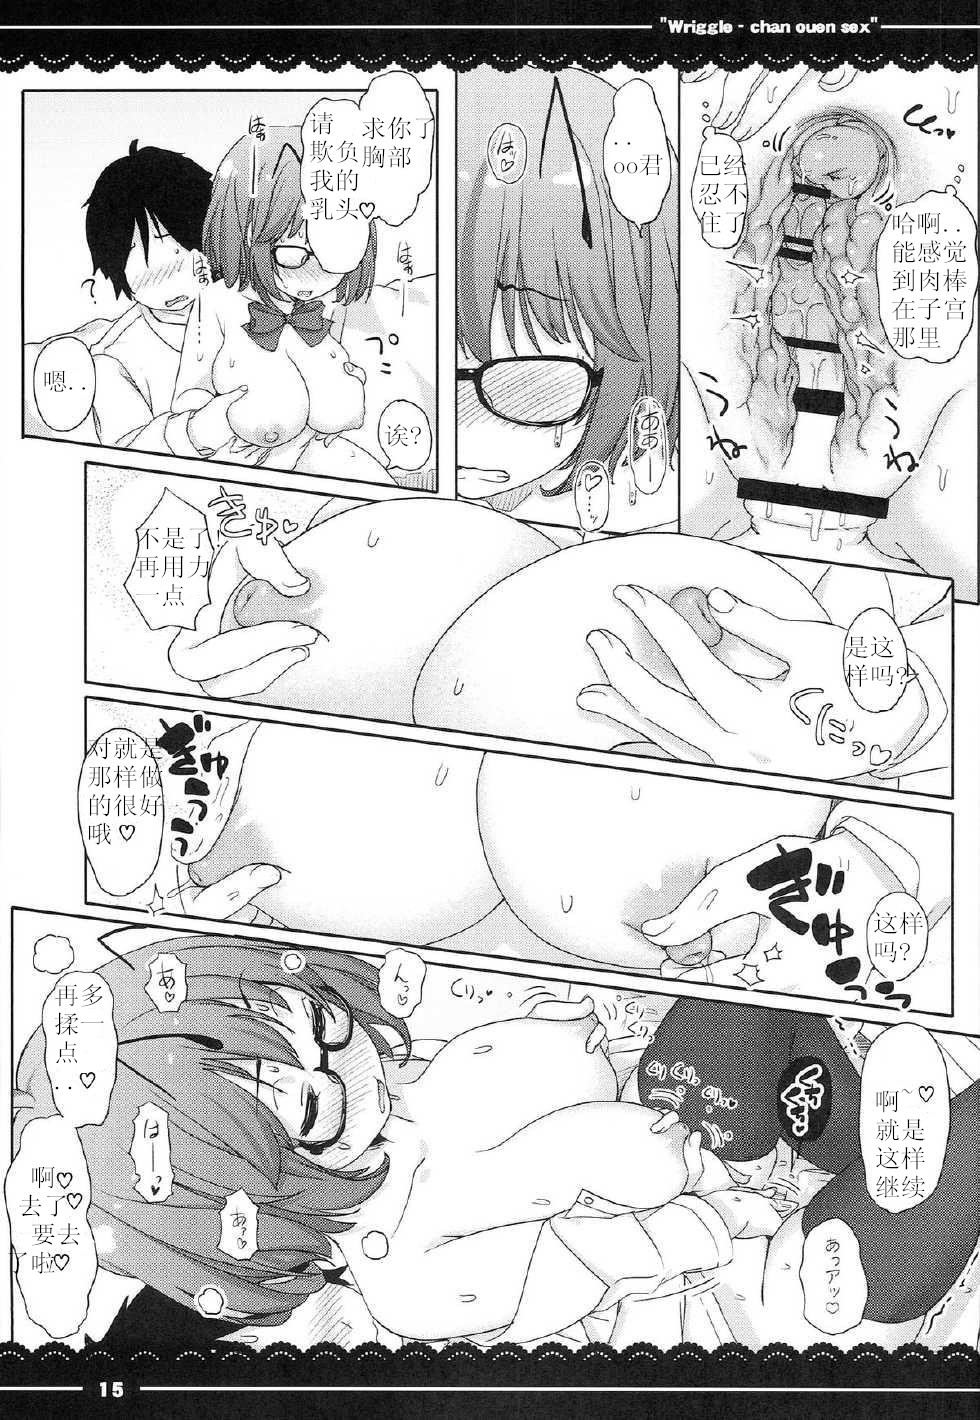 (Reitaisai 11) [Itou Life] Wriggle-chan Ouen Sex (Touhou Project) [Chinese] [N E T个人汉化] (例大祭11) [伊東ライフ] りぐるちゃん応援せっくす (東方Project) [中文翻譯]